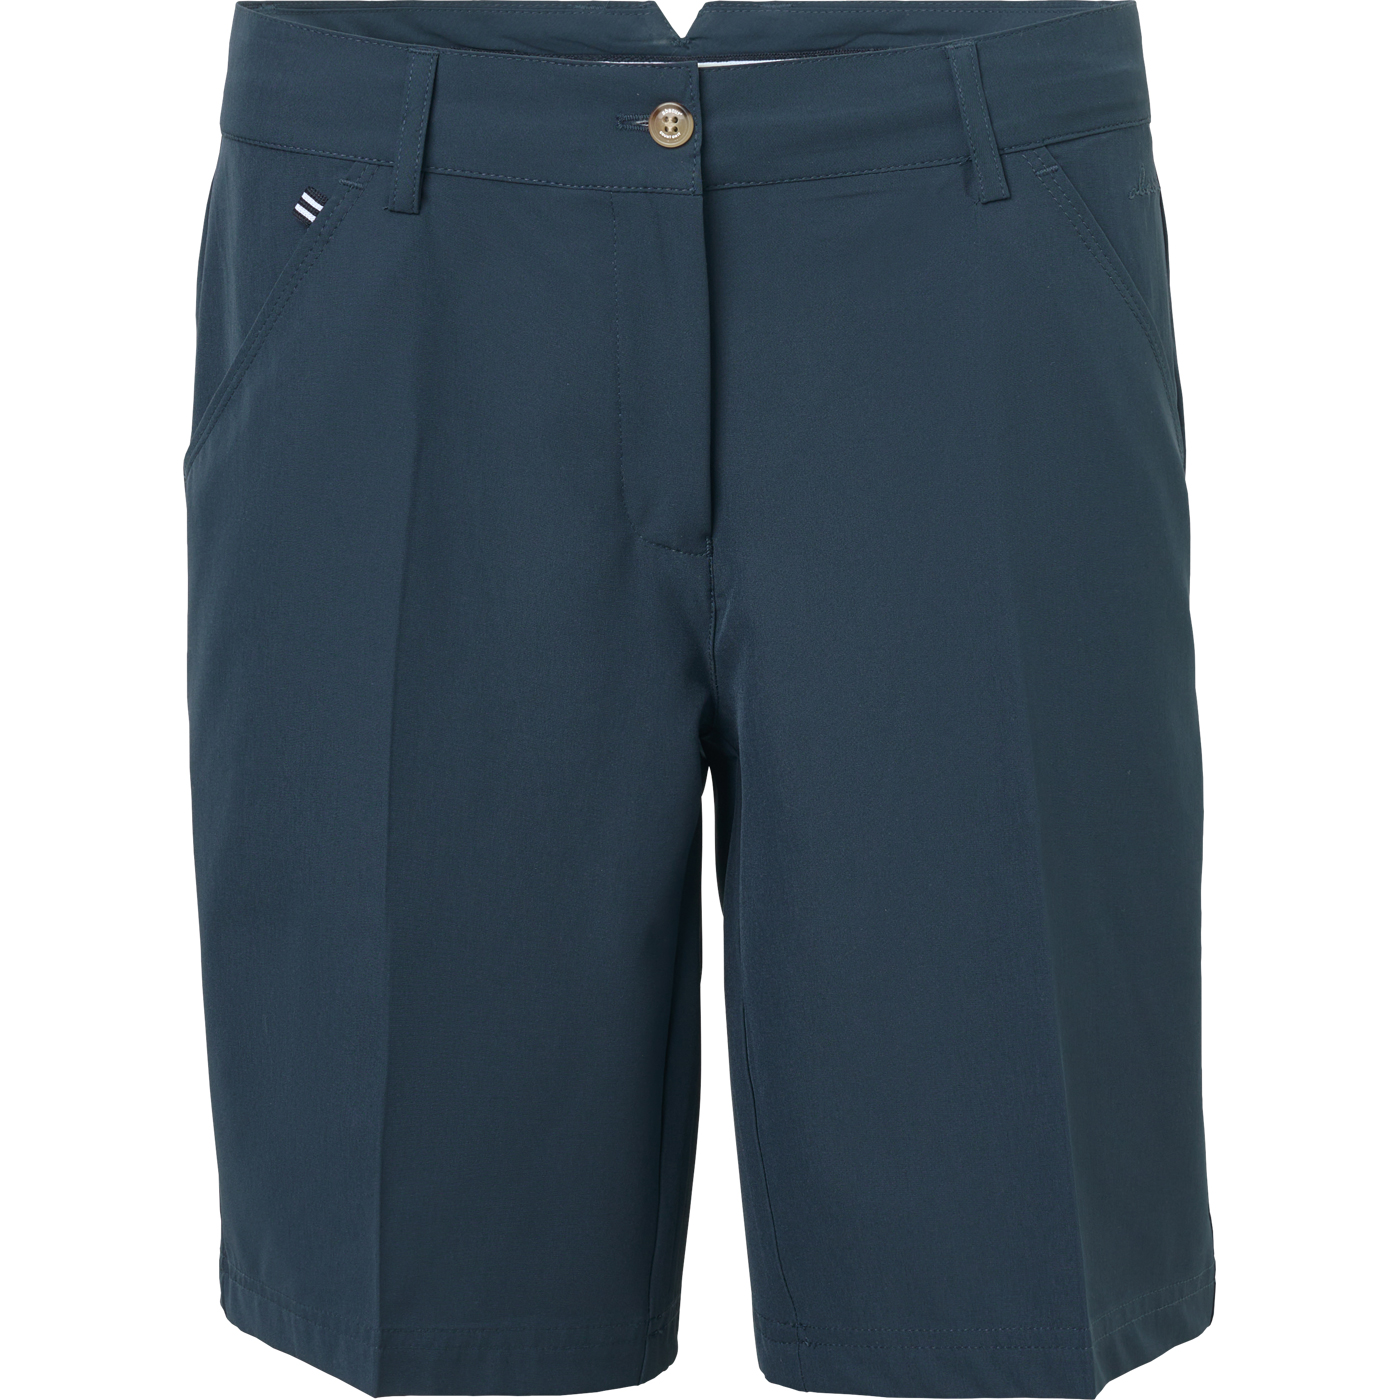 Lds Kildare shorts - navy in the group WOMEN / All clothing at Abacus Sportswear (2981300)